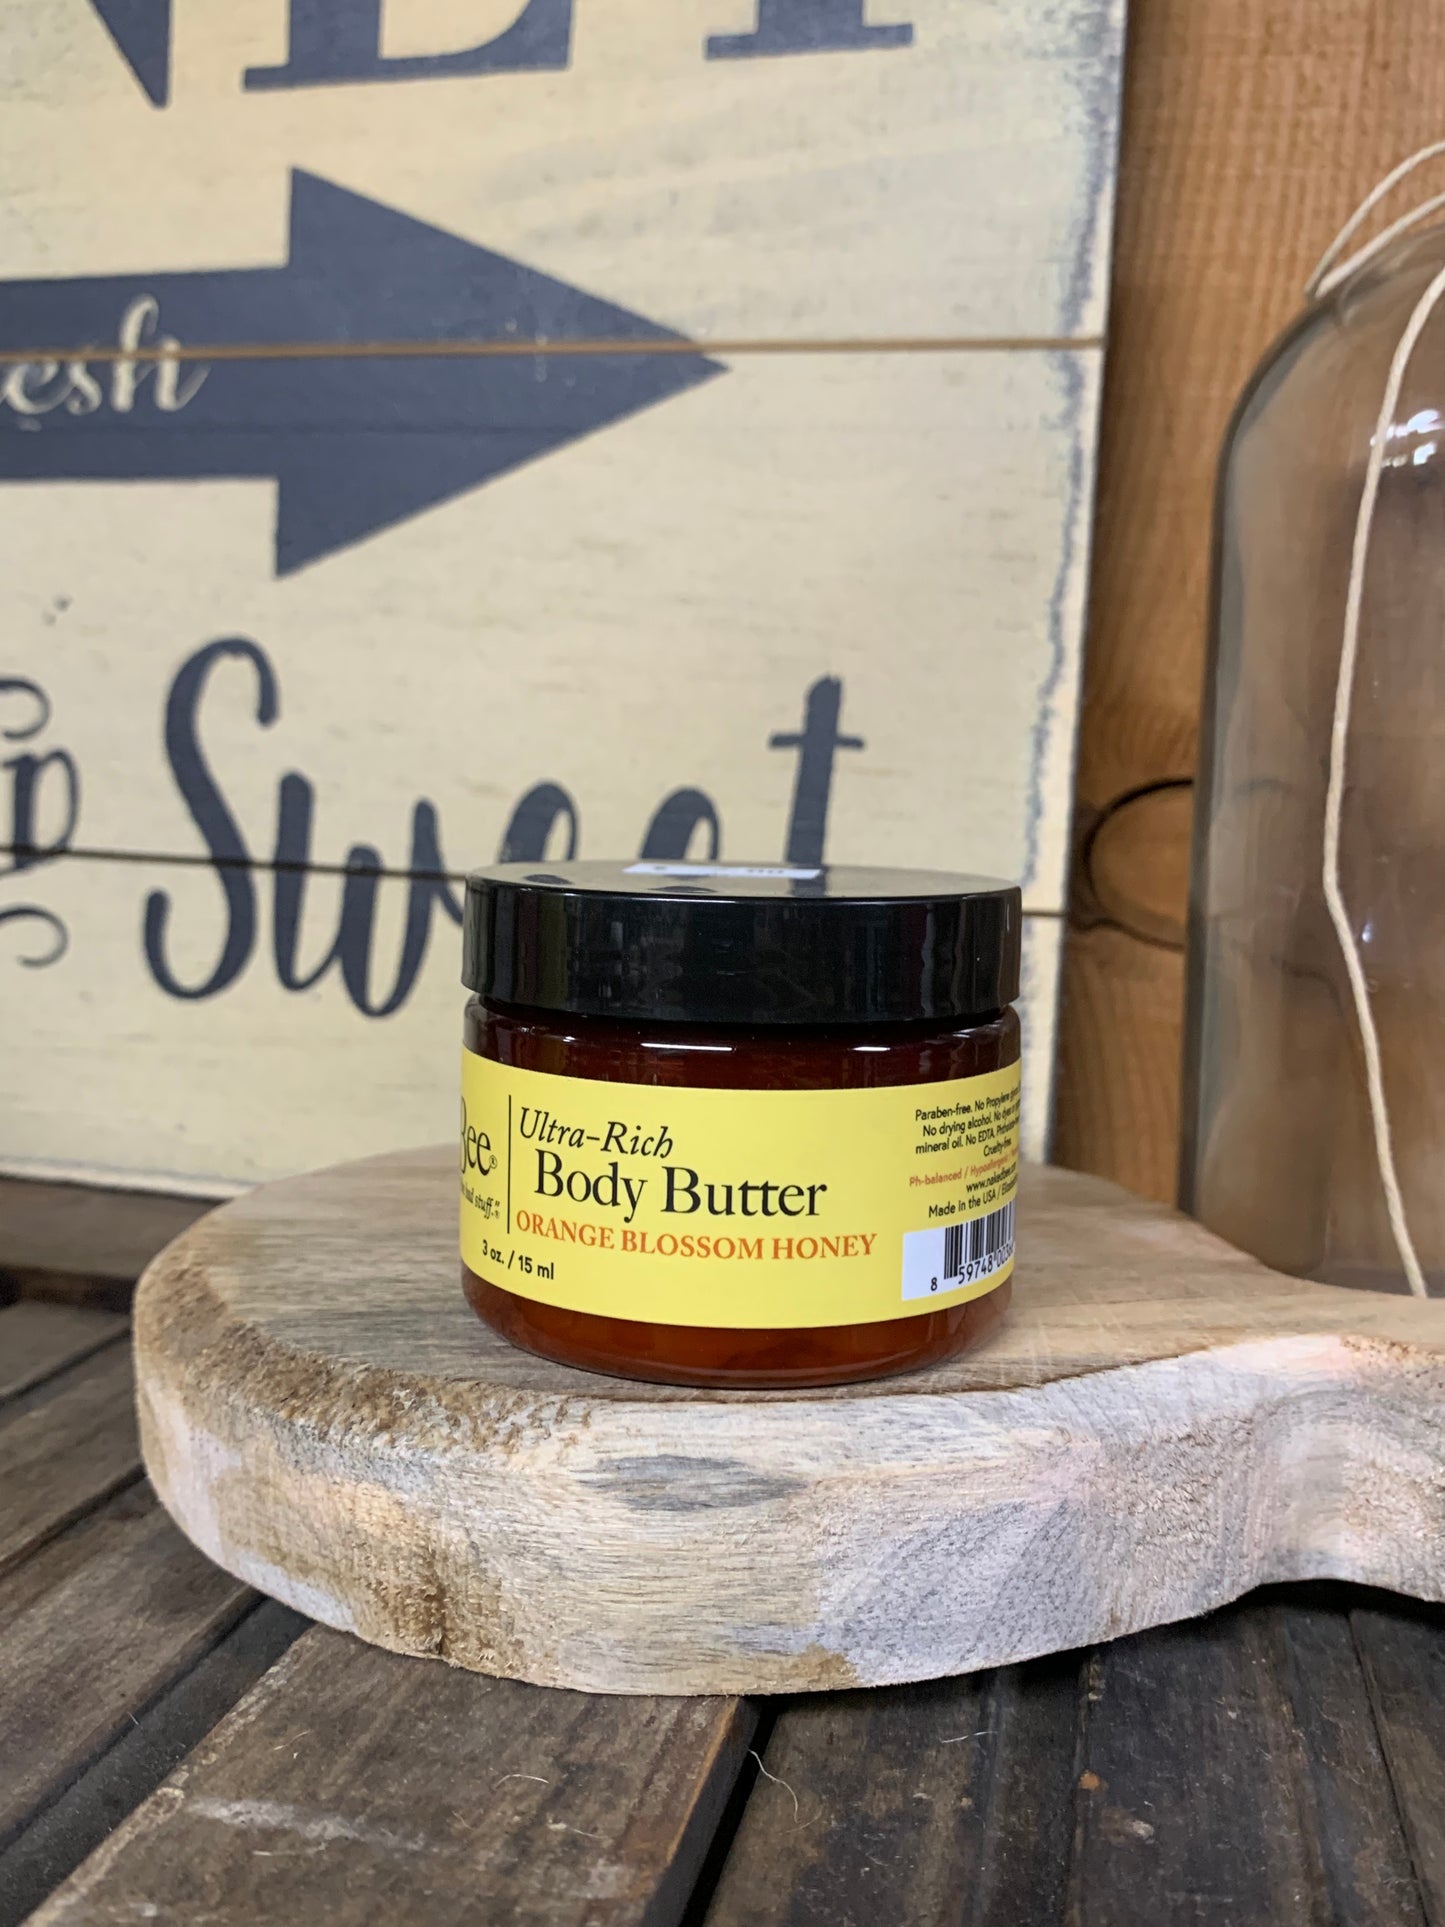 The Naked Bee - Ultra Rich Body Butter